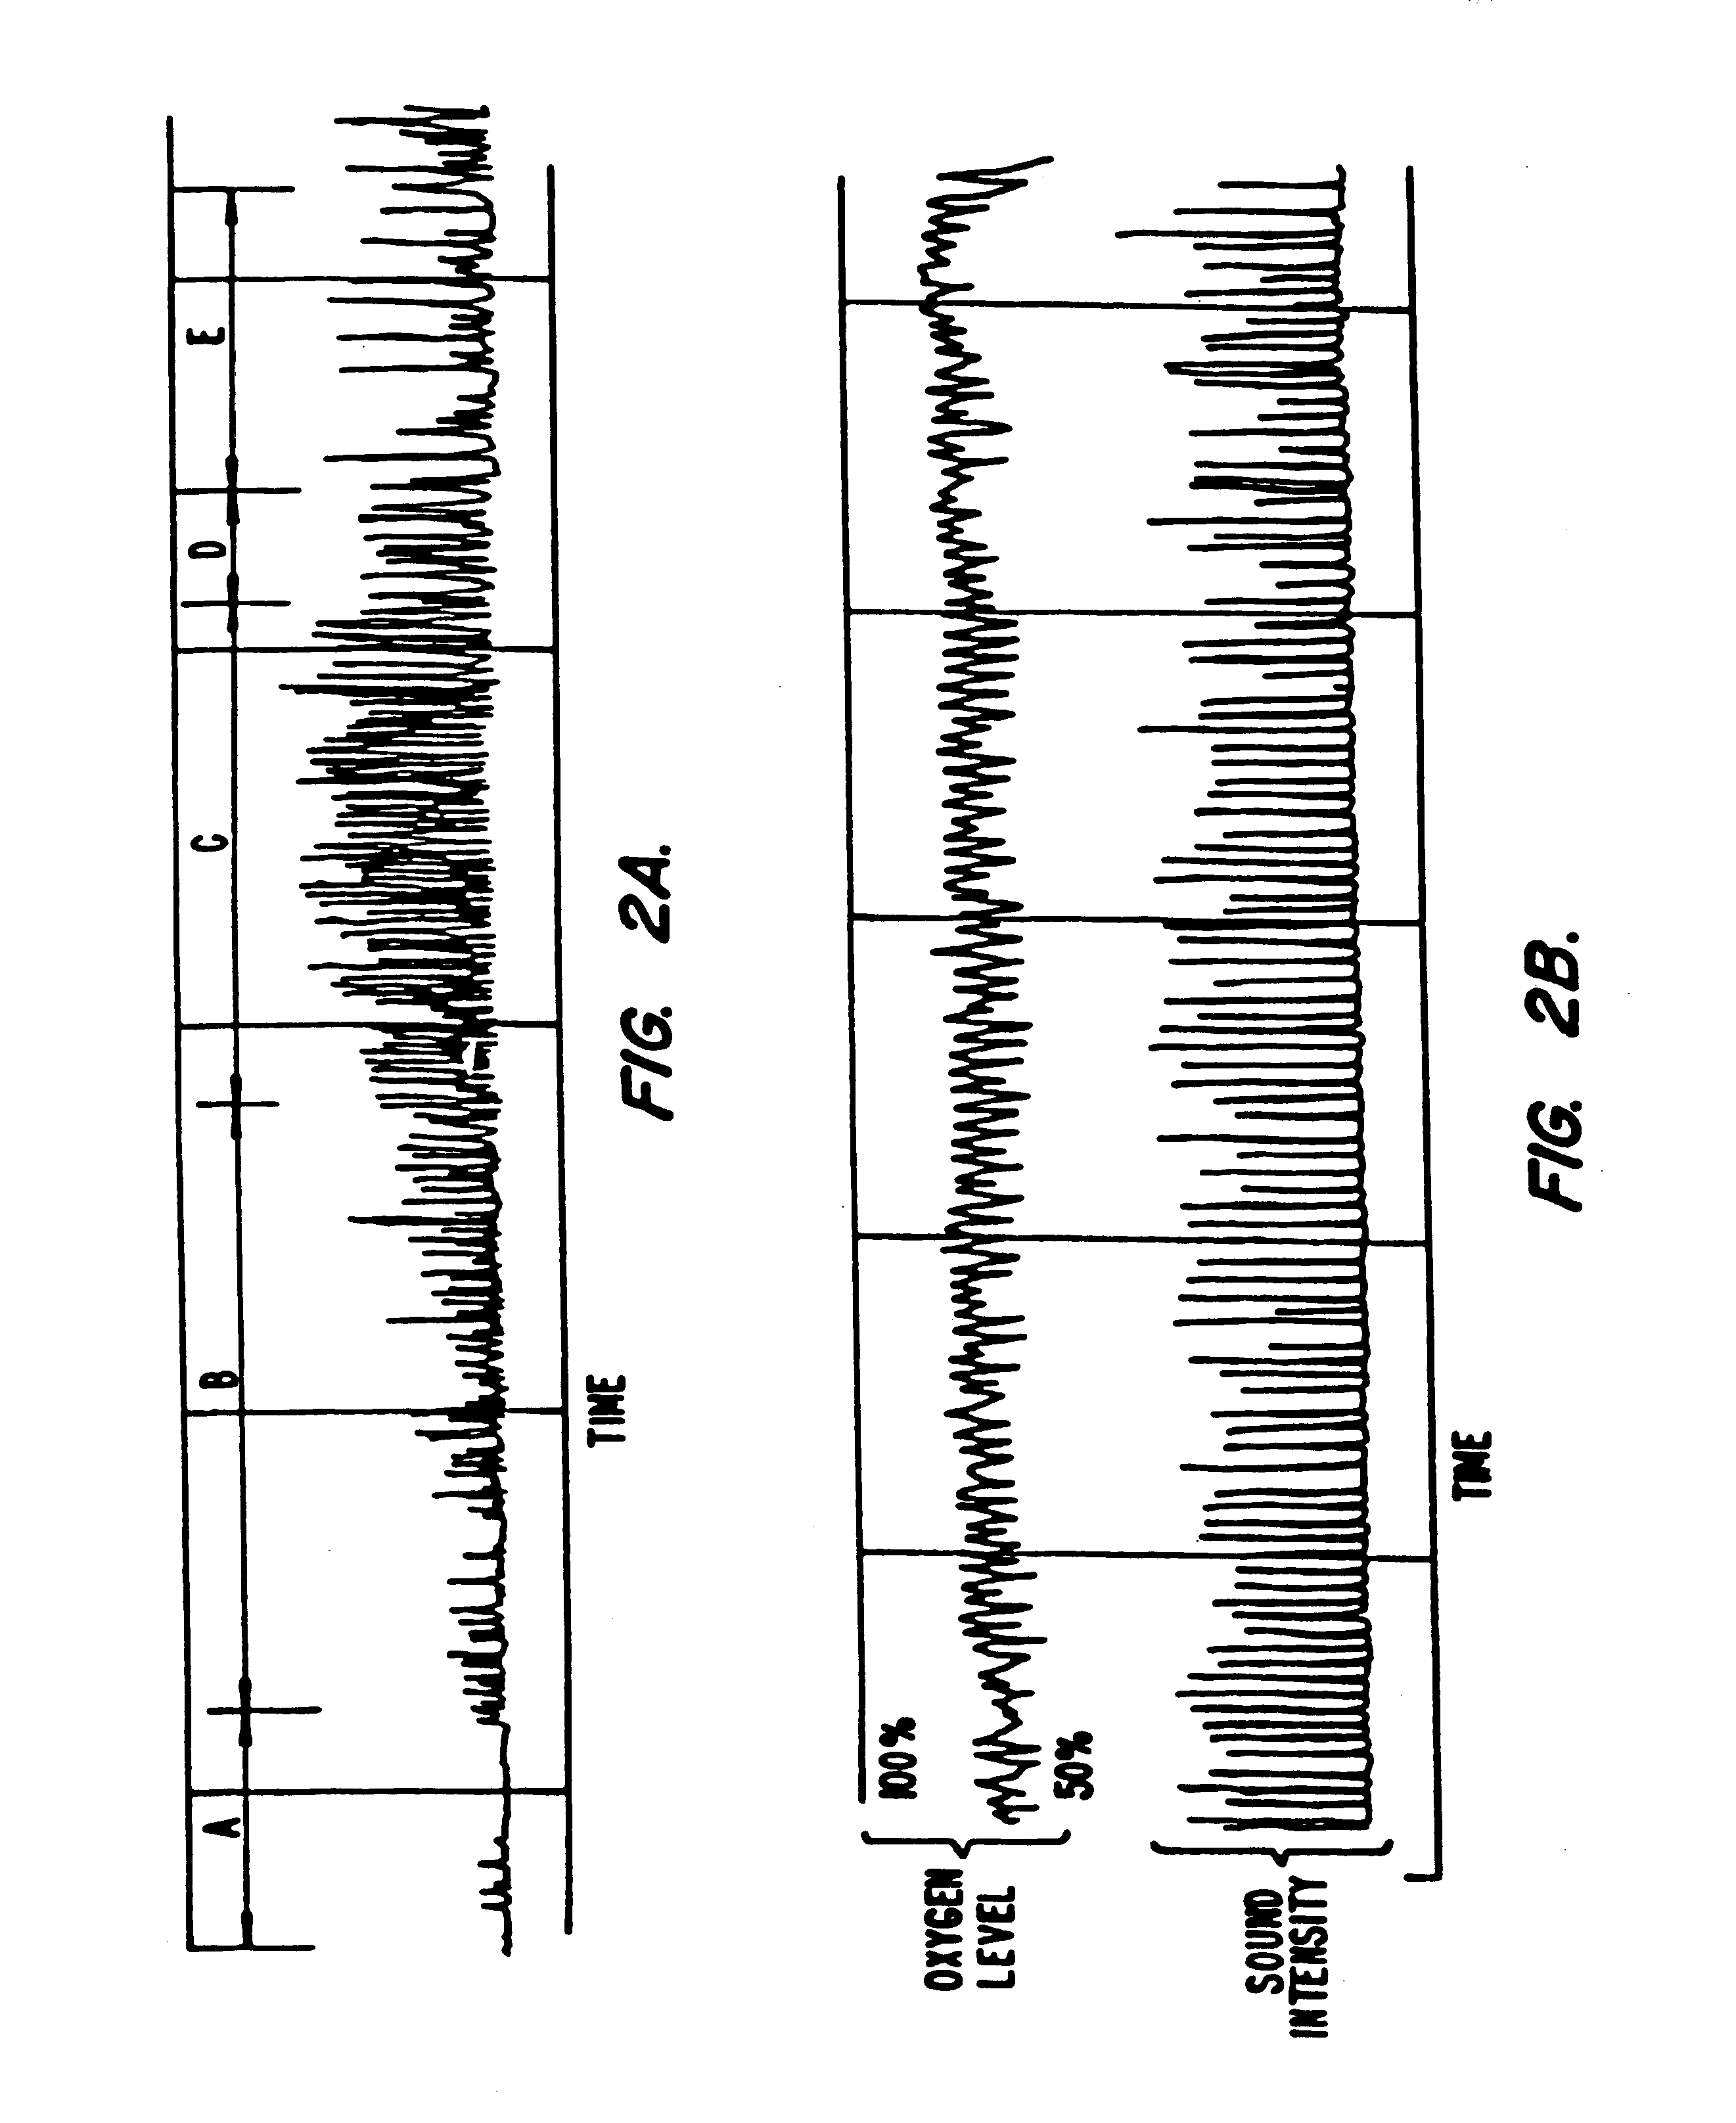 Device and method for nonclinical monitoring of breathing during sleep, control of CPAP treatment and preventing apnea